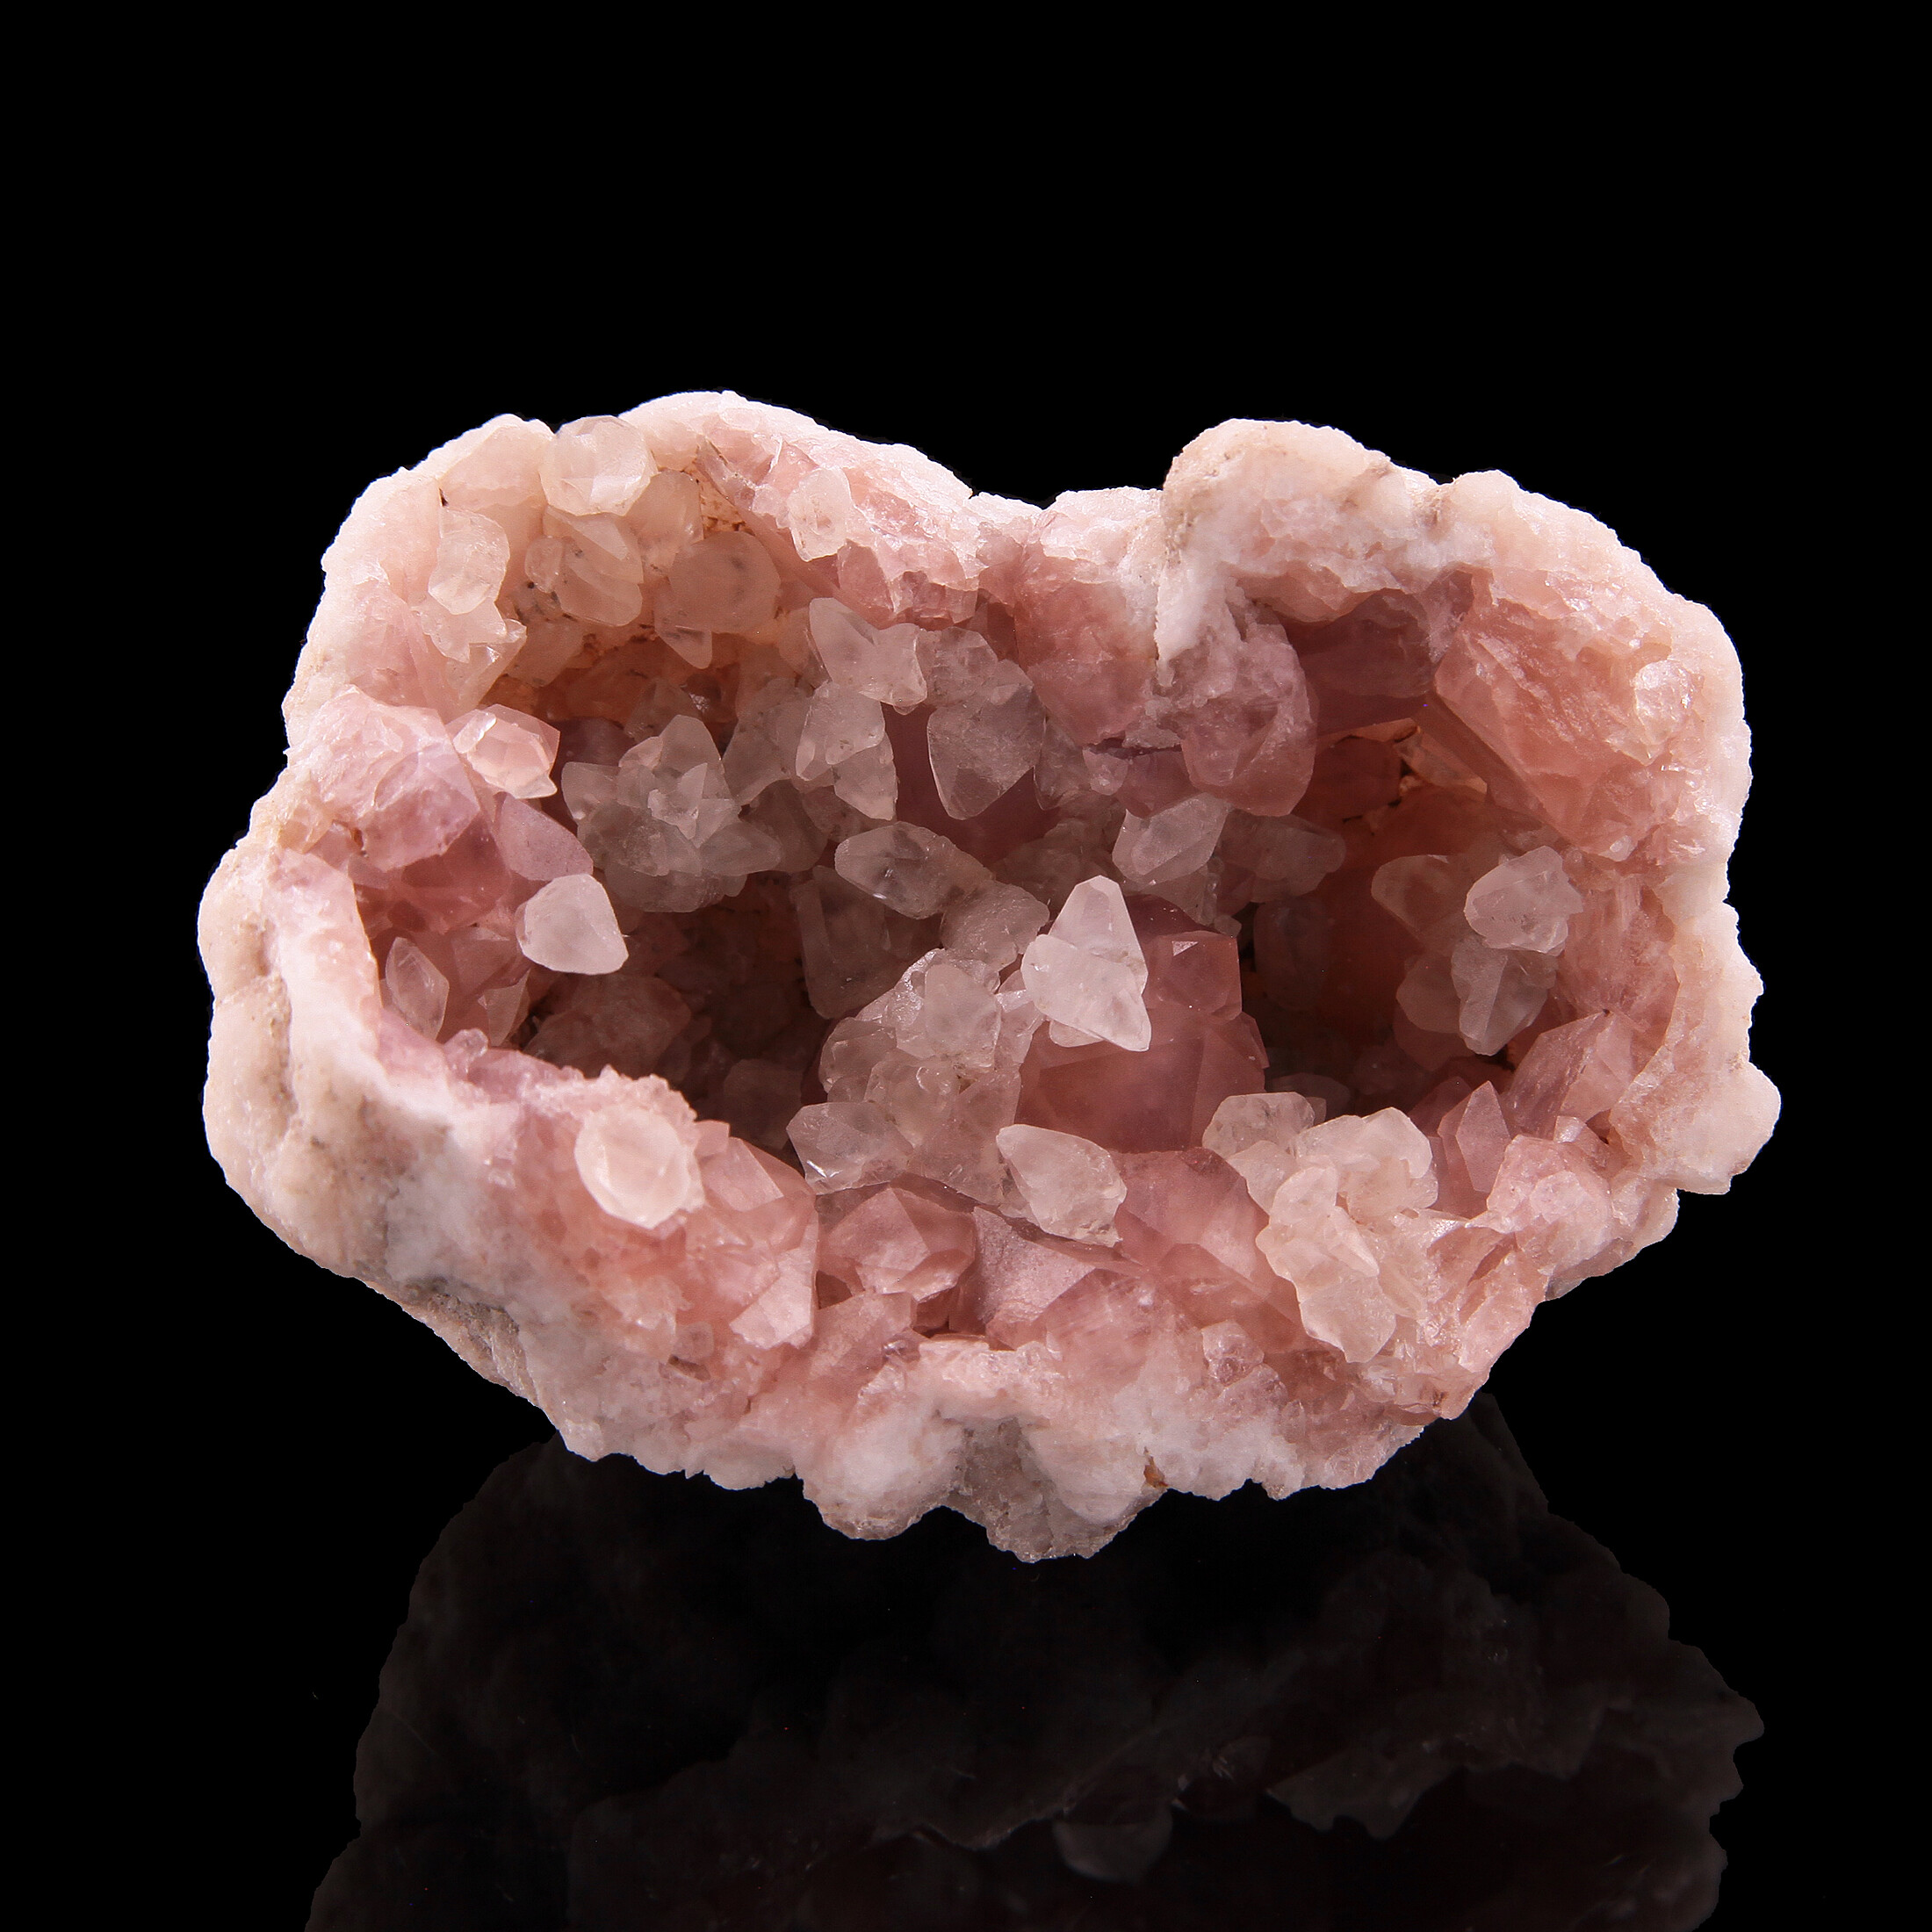 Pink Quartz with Calcite (new find) | Choique Mine, Pehuenches